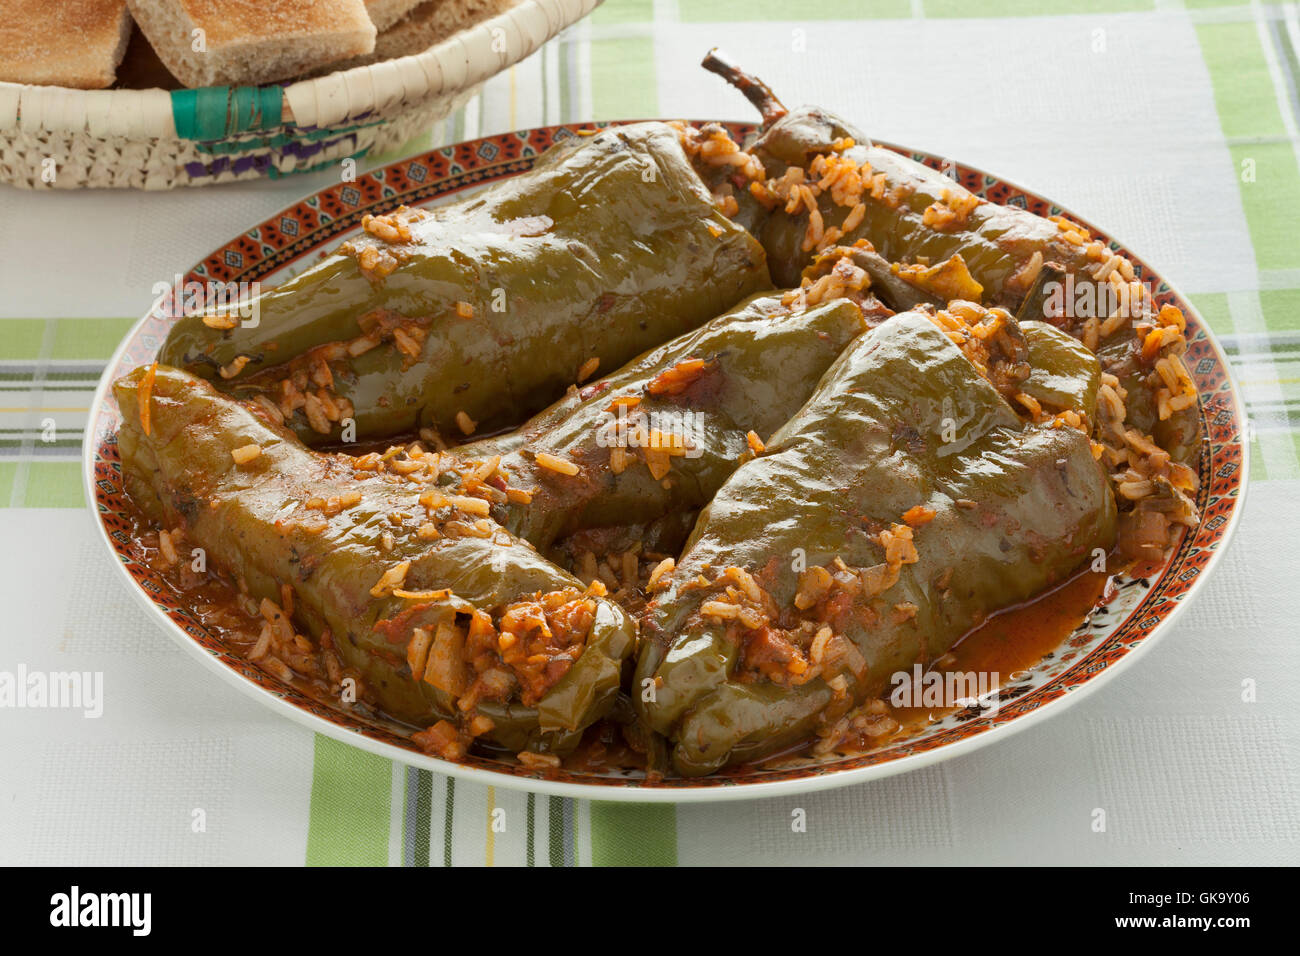 Traditional Moroccan dish with stuffed bell peppers and rice Stock Photo